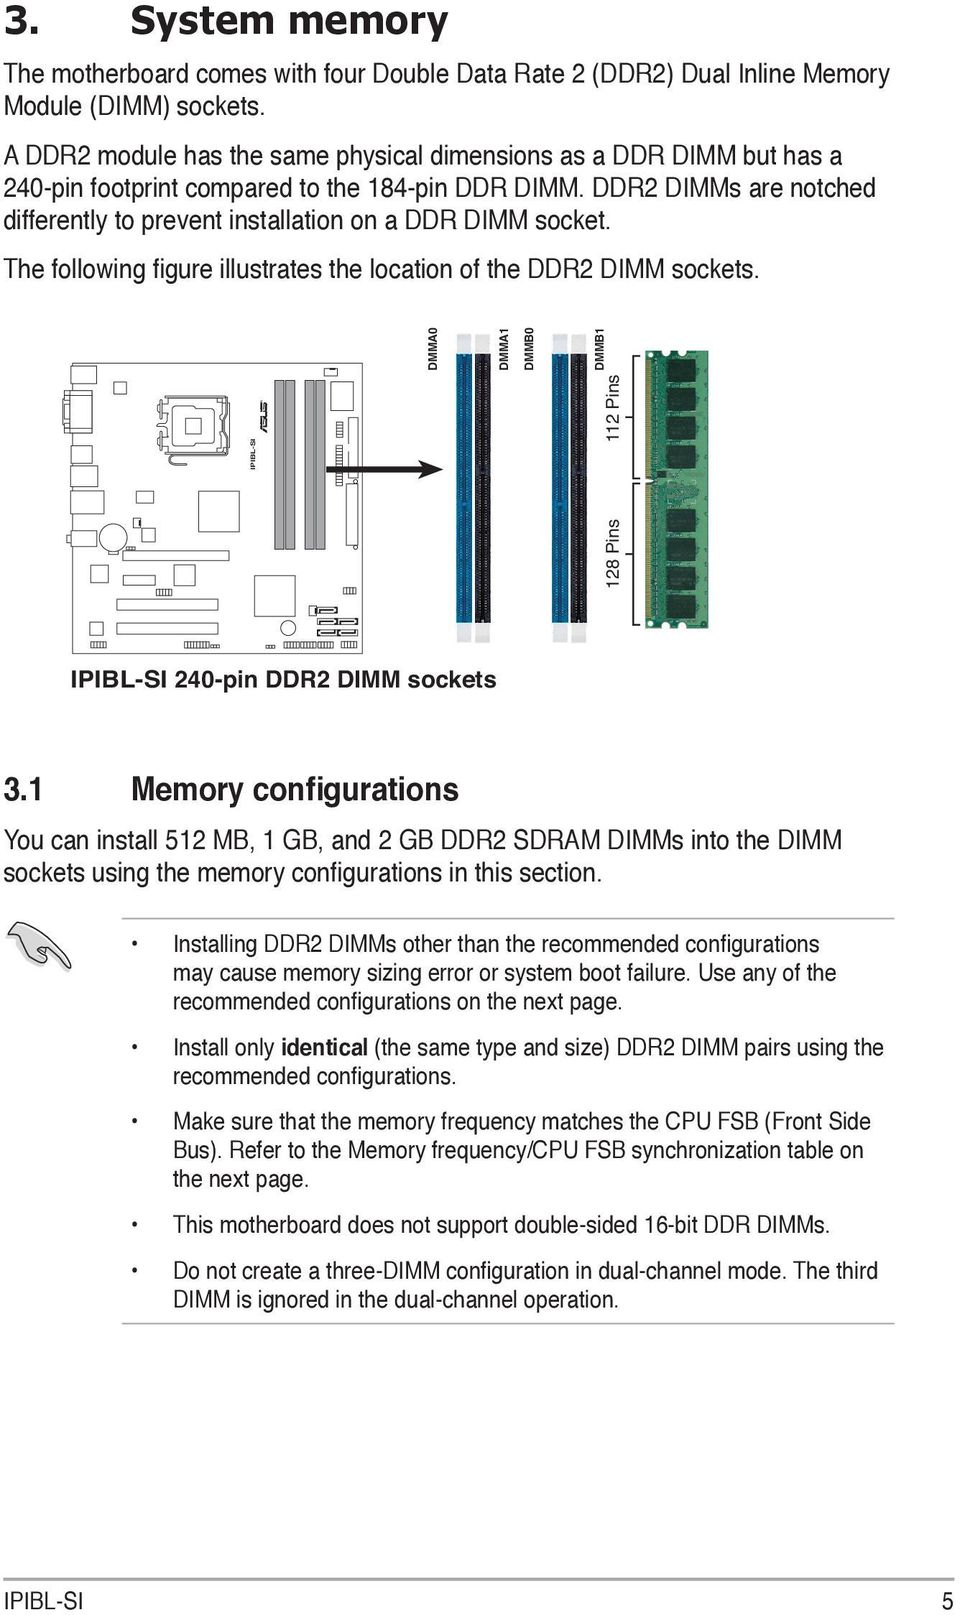 DDR2 DIMMs are notched differently to prevent installation on a DDR DIMM socket. The following figure illustrates the location of the DDR2 DIMM sockets.